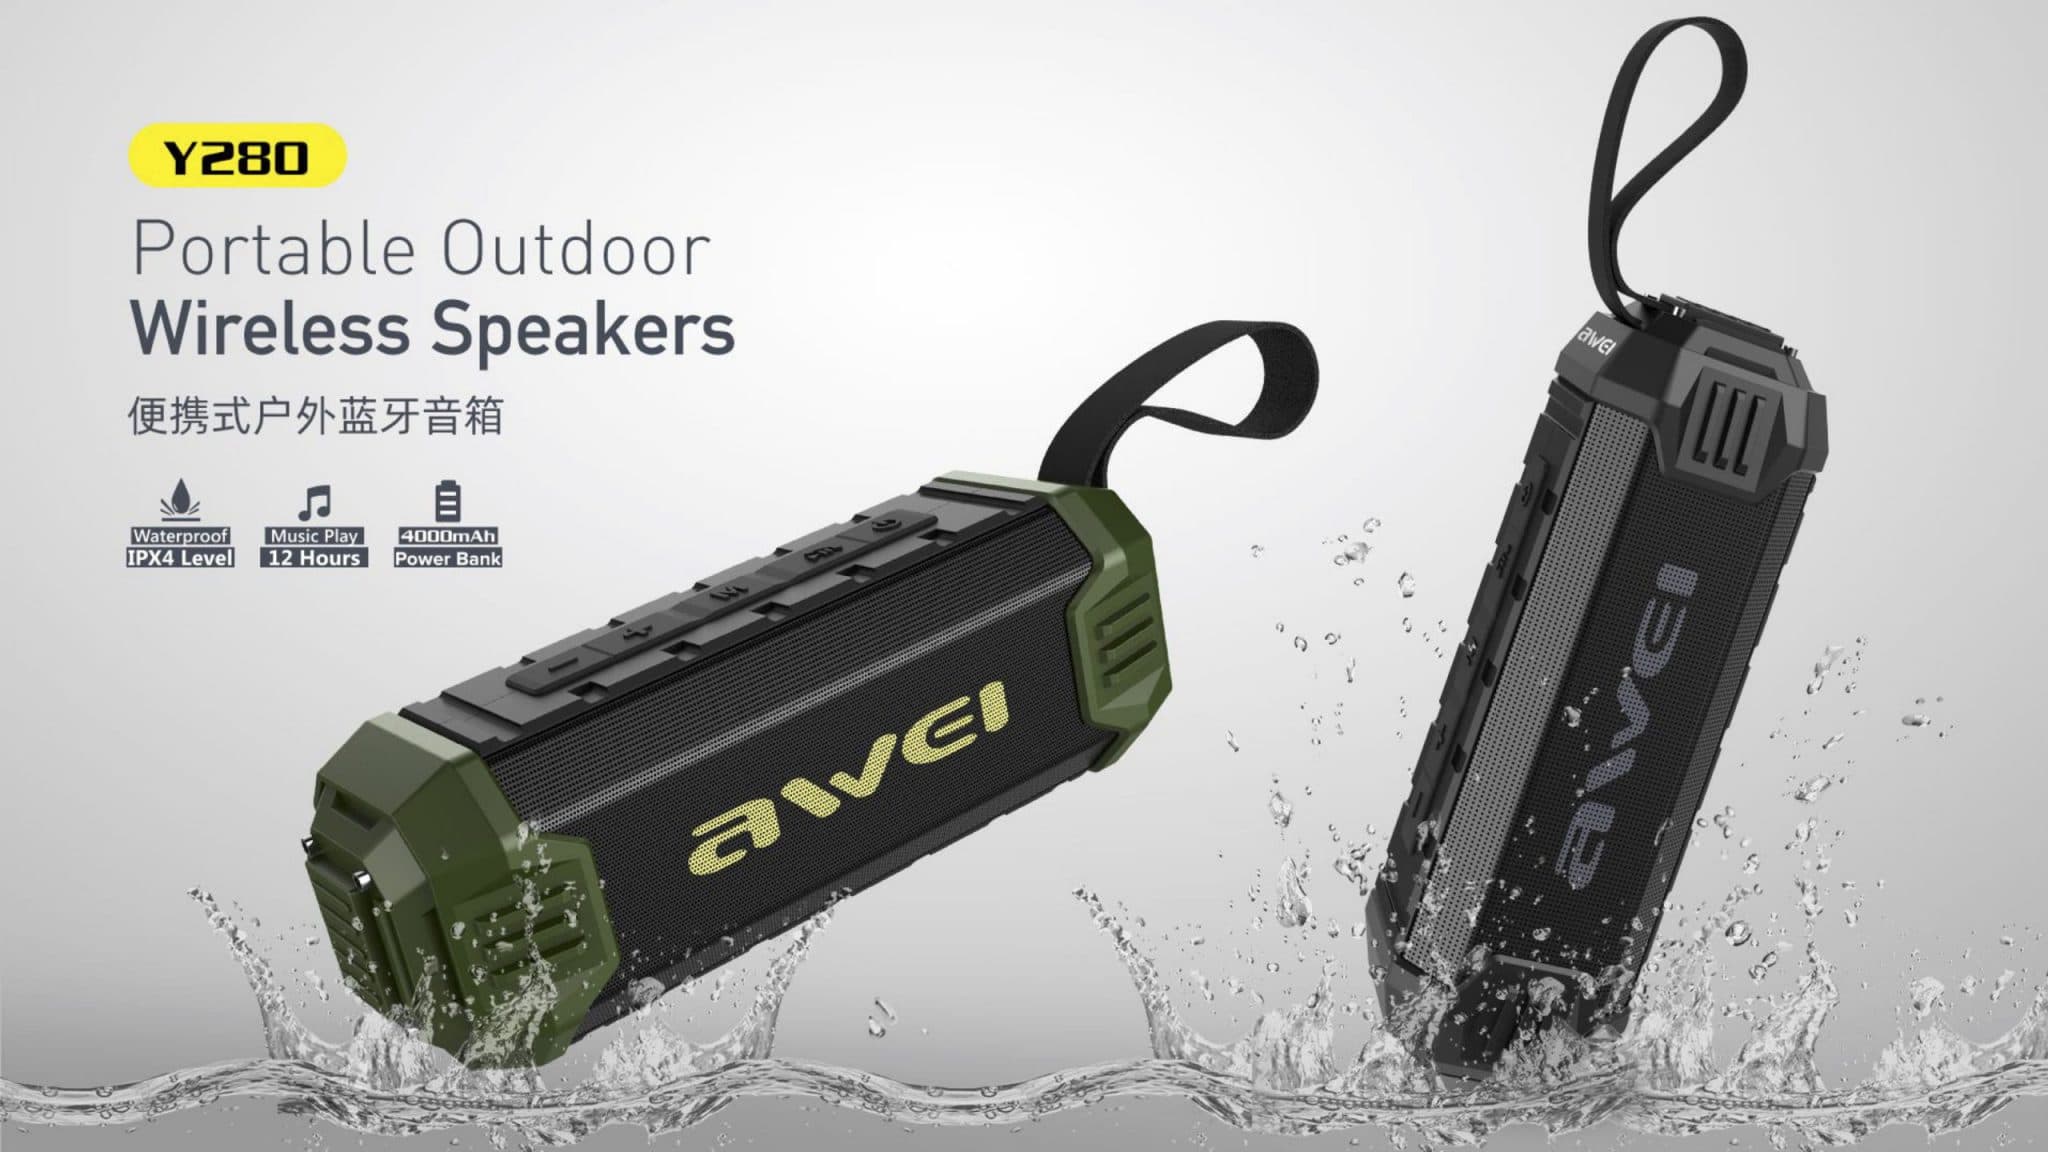 Awei Portable Outdoor Wireless Speakers Y280